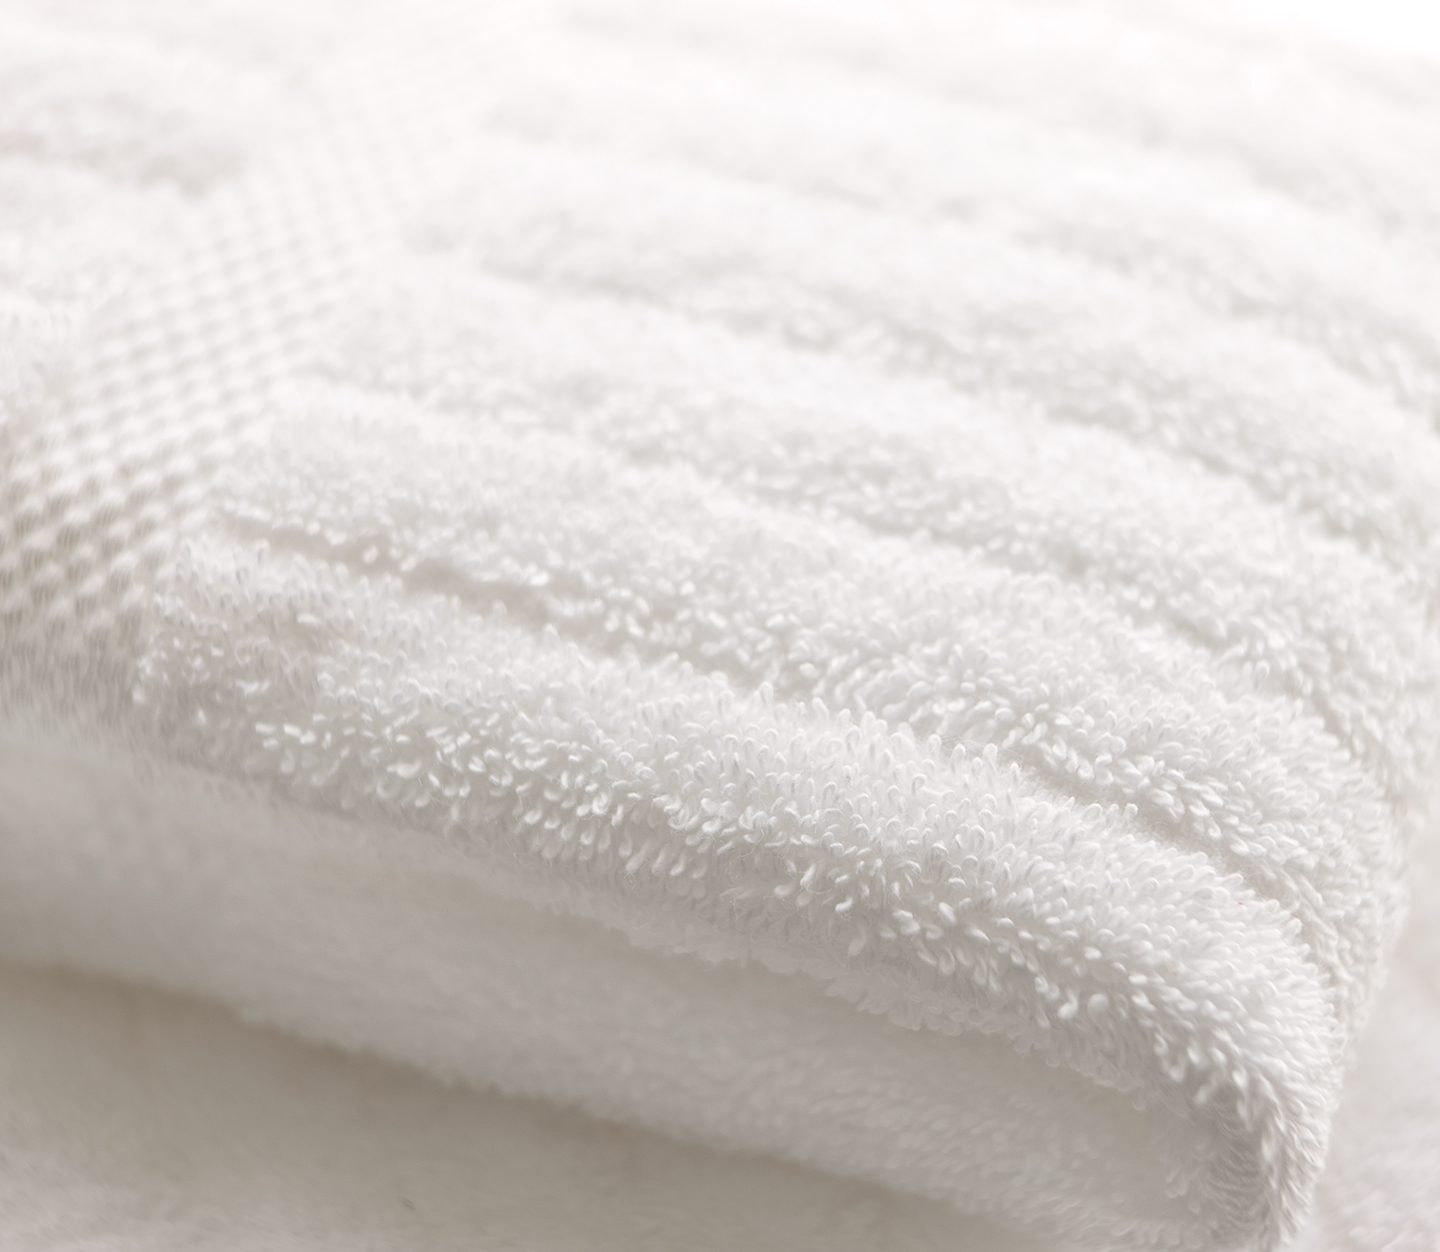 Standard Textile - Luxe Towels (Capitol), White, Washcloth - Set of 4